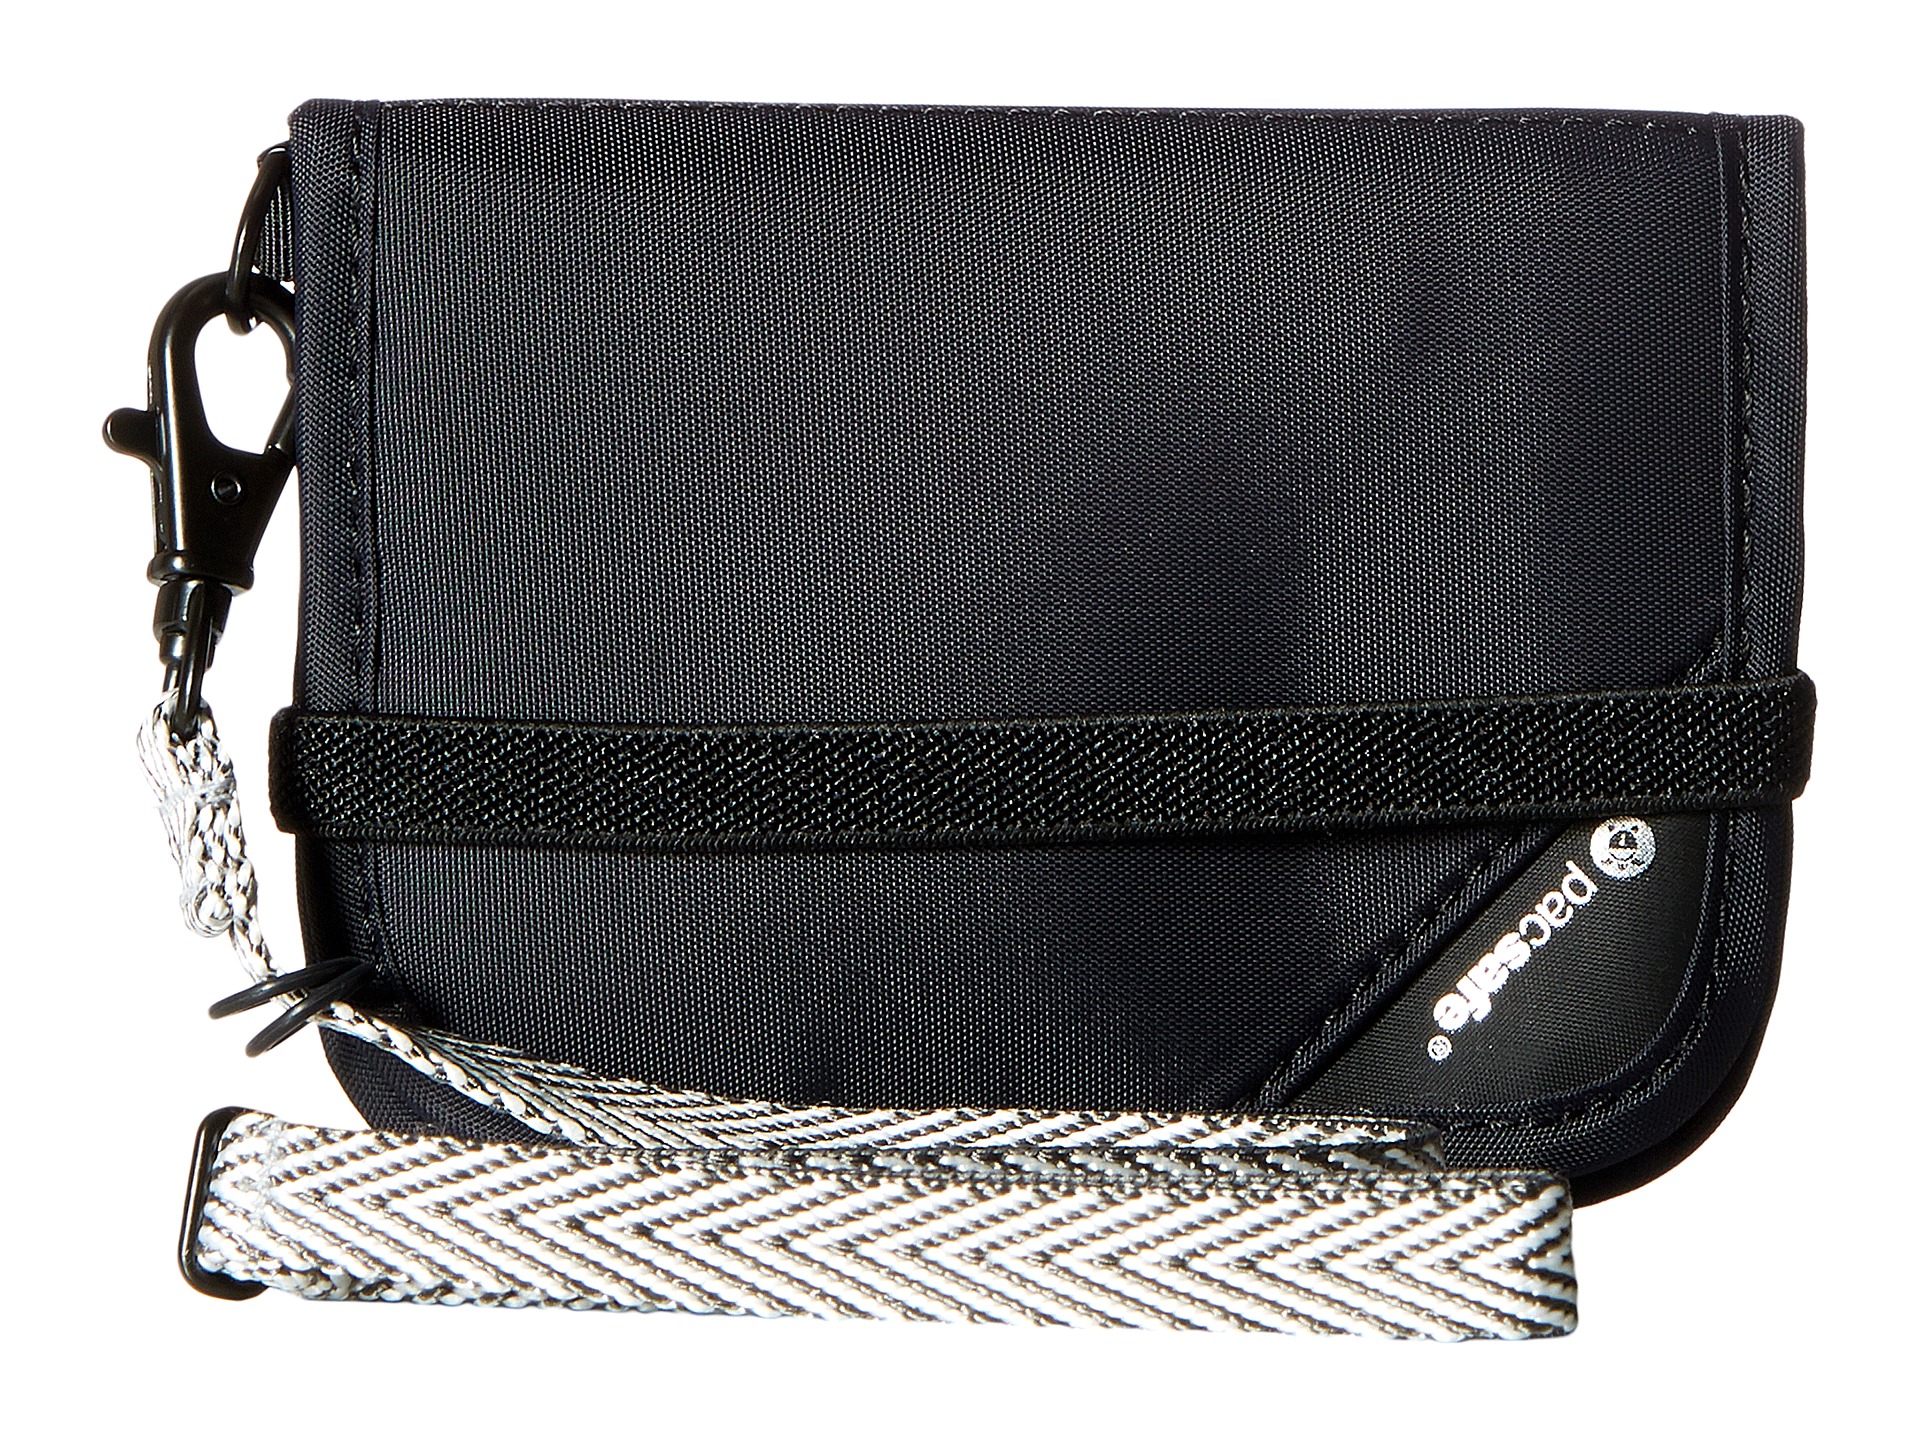 Pacsafe RFIDsafe V50 Anti-Theft RFID Blocking Compact Wallet at Zappos.com